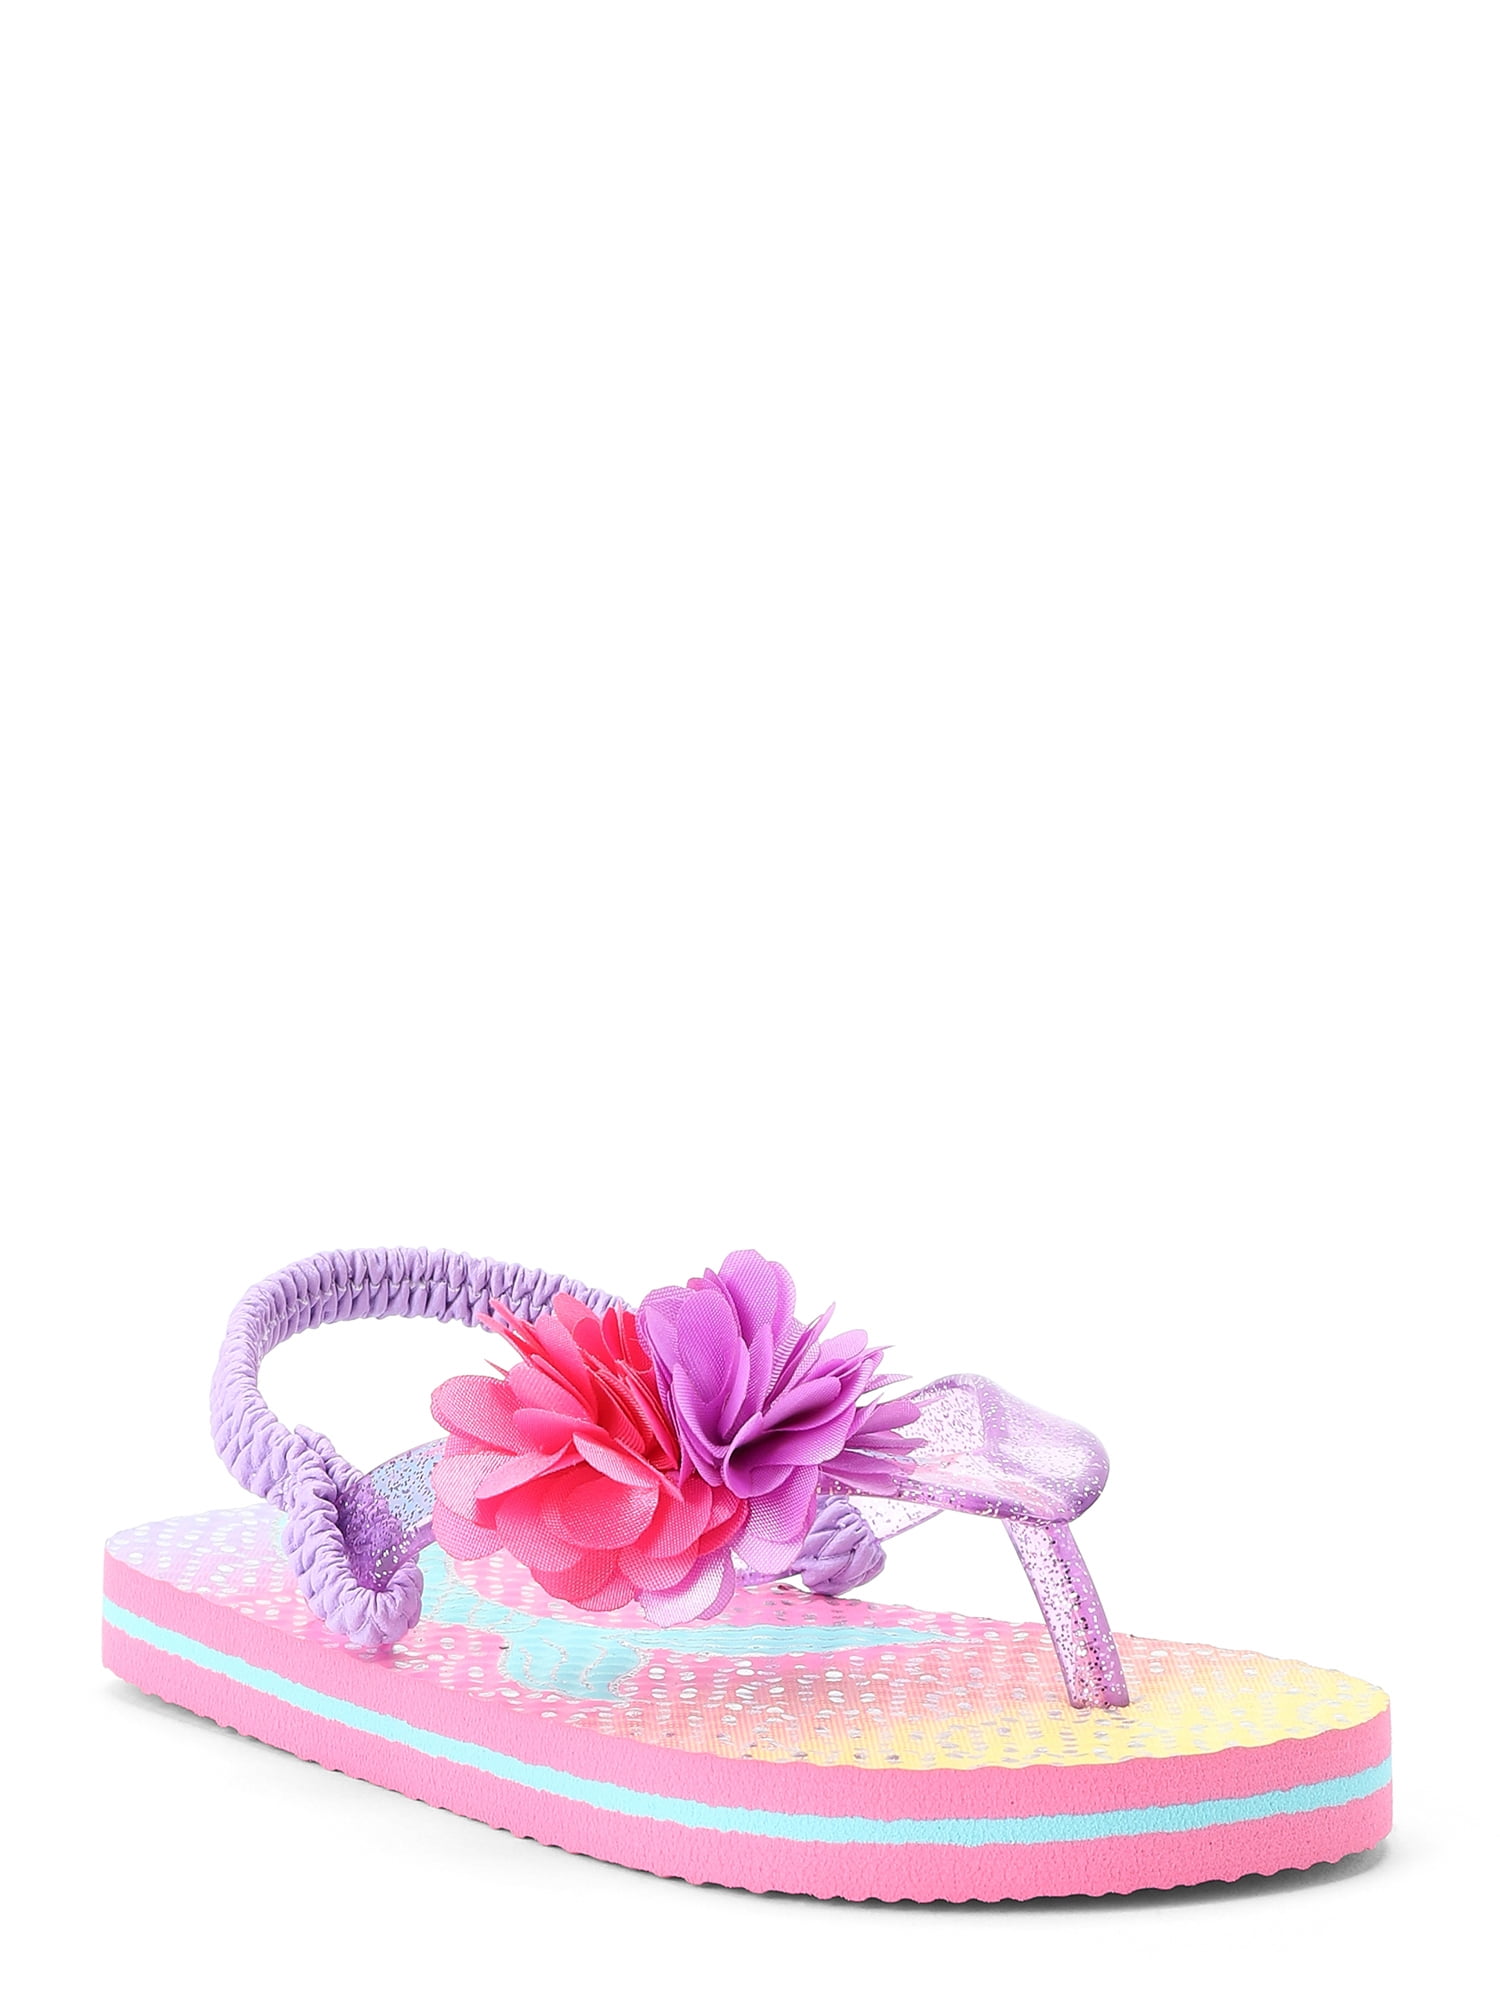 Details about   Wonder Nation Mermaid Printed Girls  Flip Flop With Strap Size 7/8,9/10,11/12 